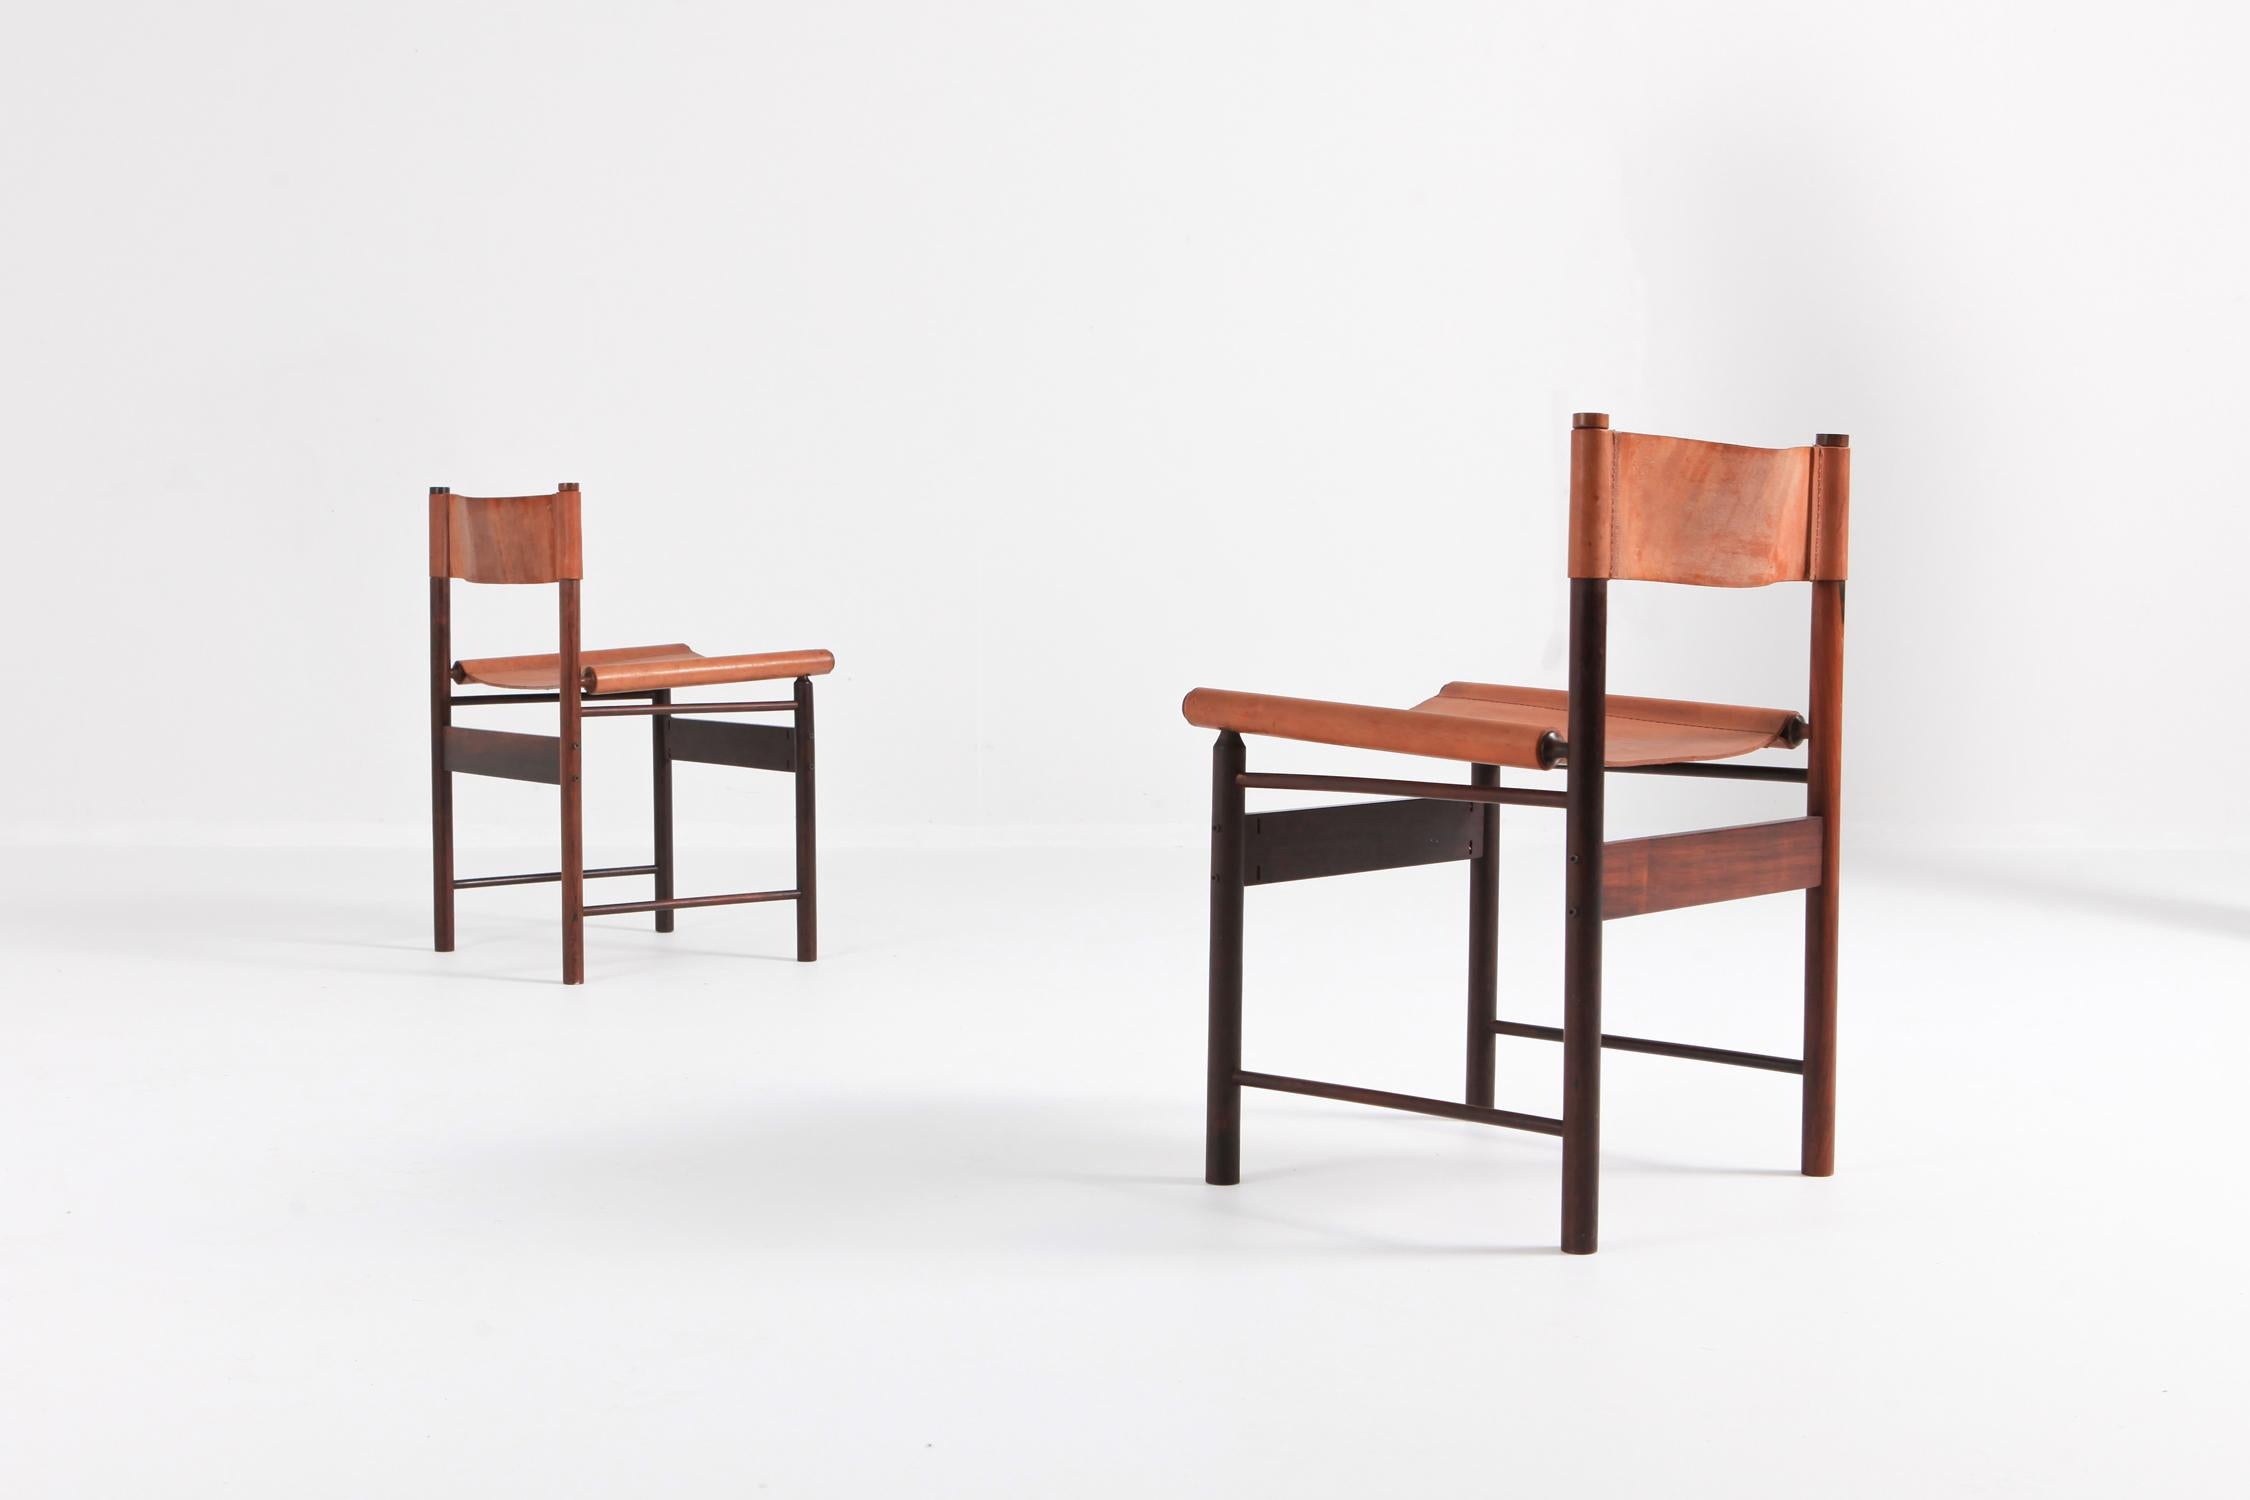 L'atelier Brazil set of six dining chairs by Jorge Zalszupin (°Warsaw, 1922).

Produced by, circa 1955.

Brazilian wood / jacaranda and leather.

These are also featured in the book about Jorge Zalszupin and Modern Design in Brazil.
Very